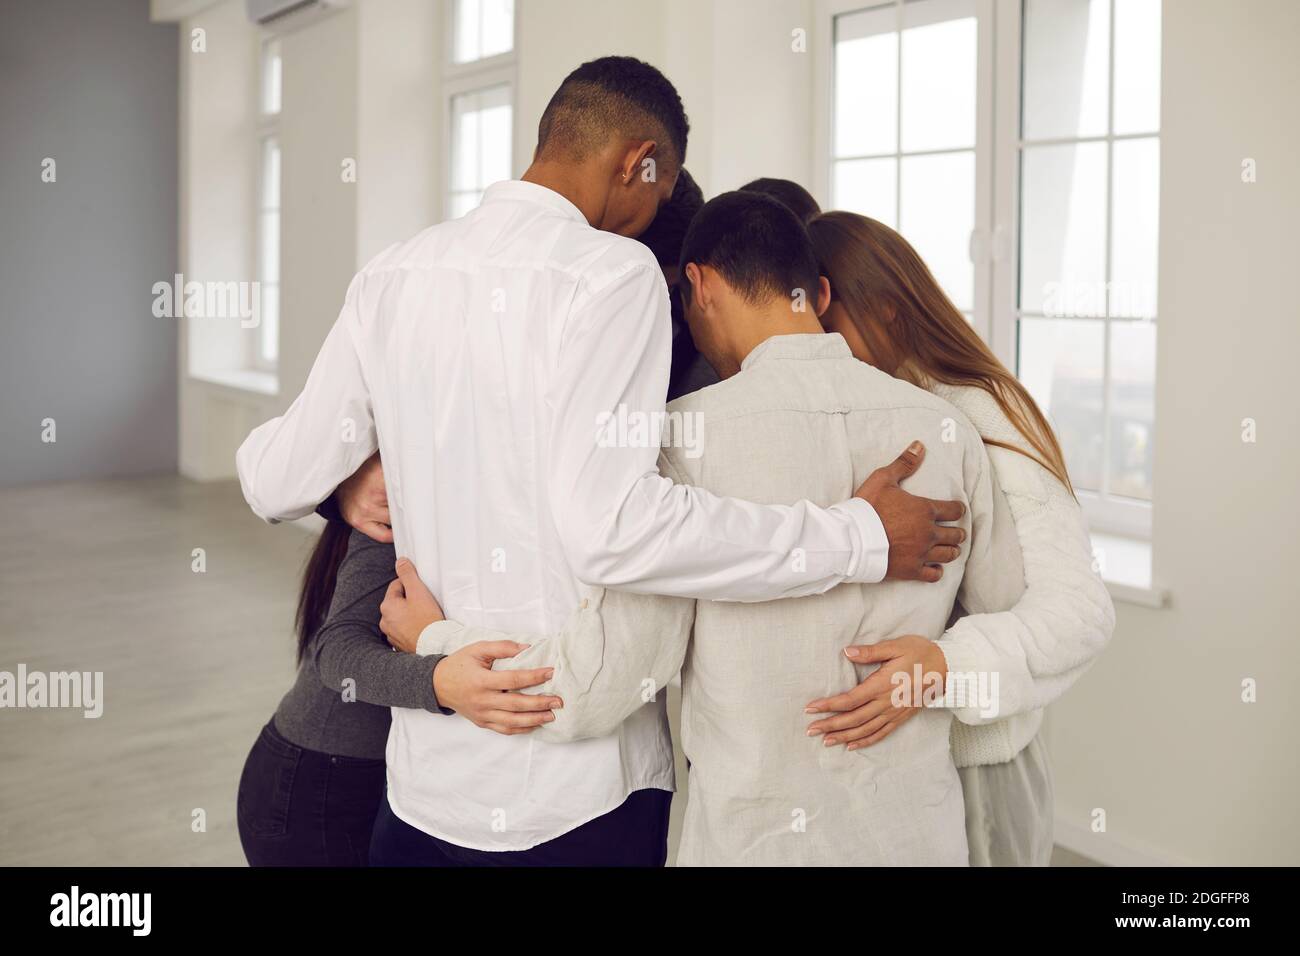 Team of young colleagues or students standing in circle and embracing each other Stock Photo